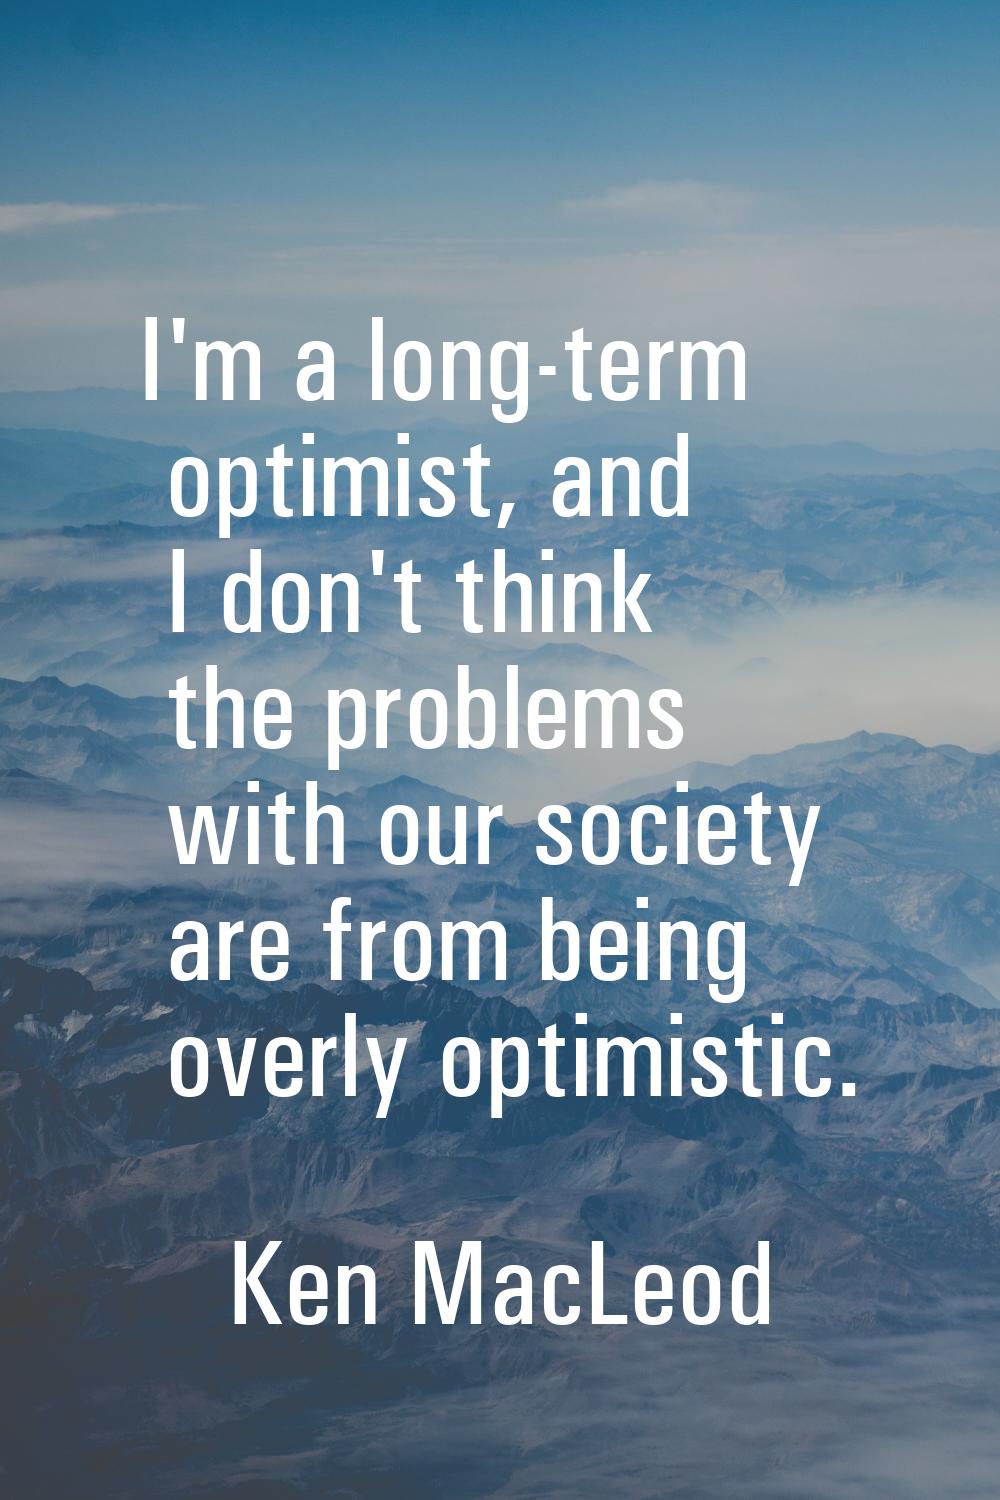 I'm a long-term optimist, and I don't think the problems with our society are from being overly opt